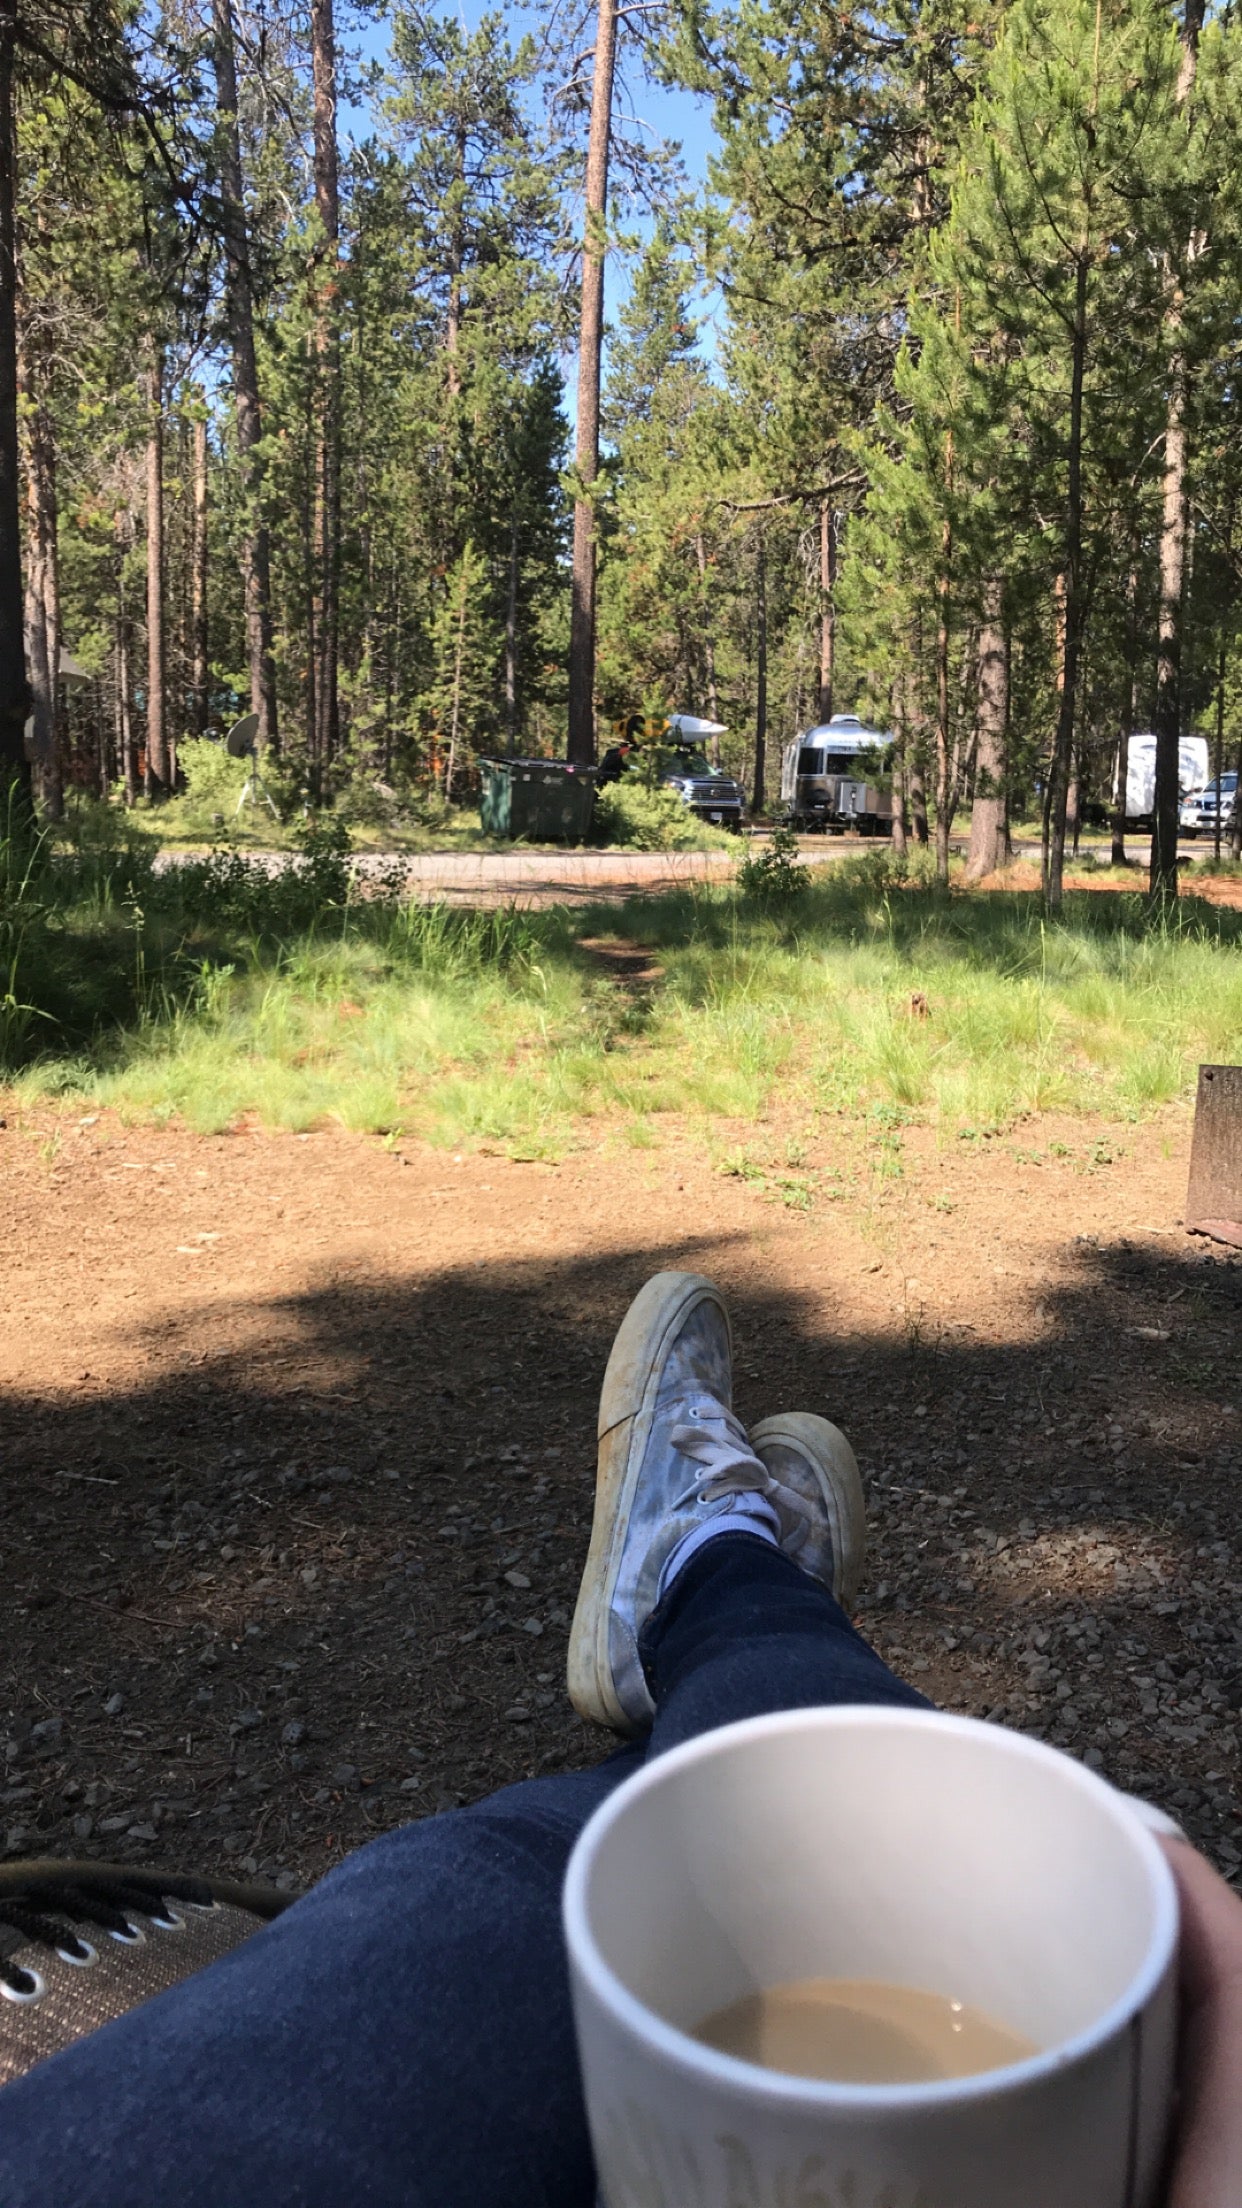 Camper submitted image from Thousand Trails Bend-Sunriver - 2